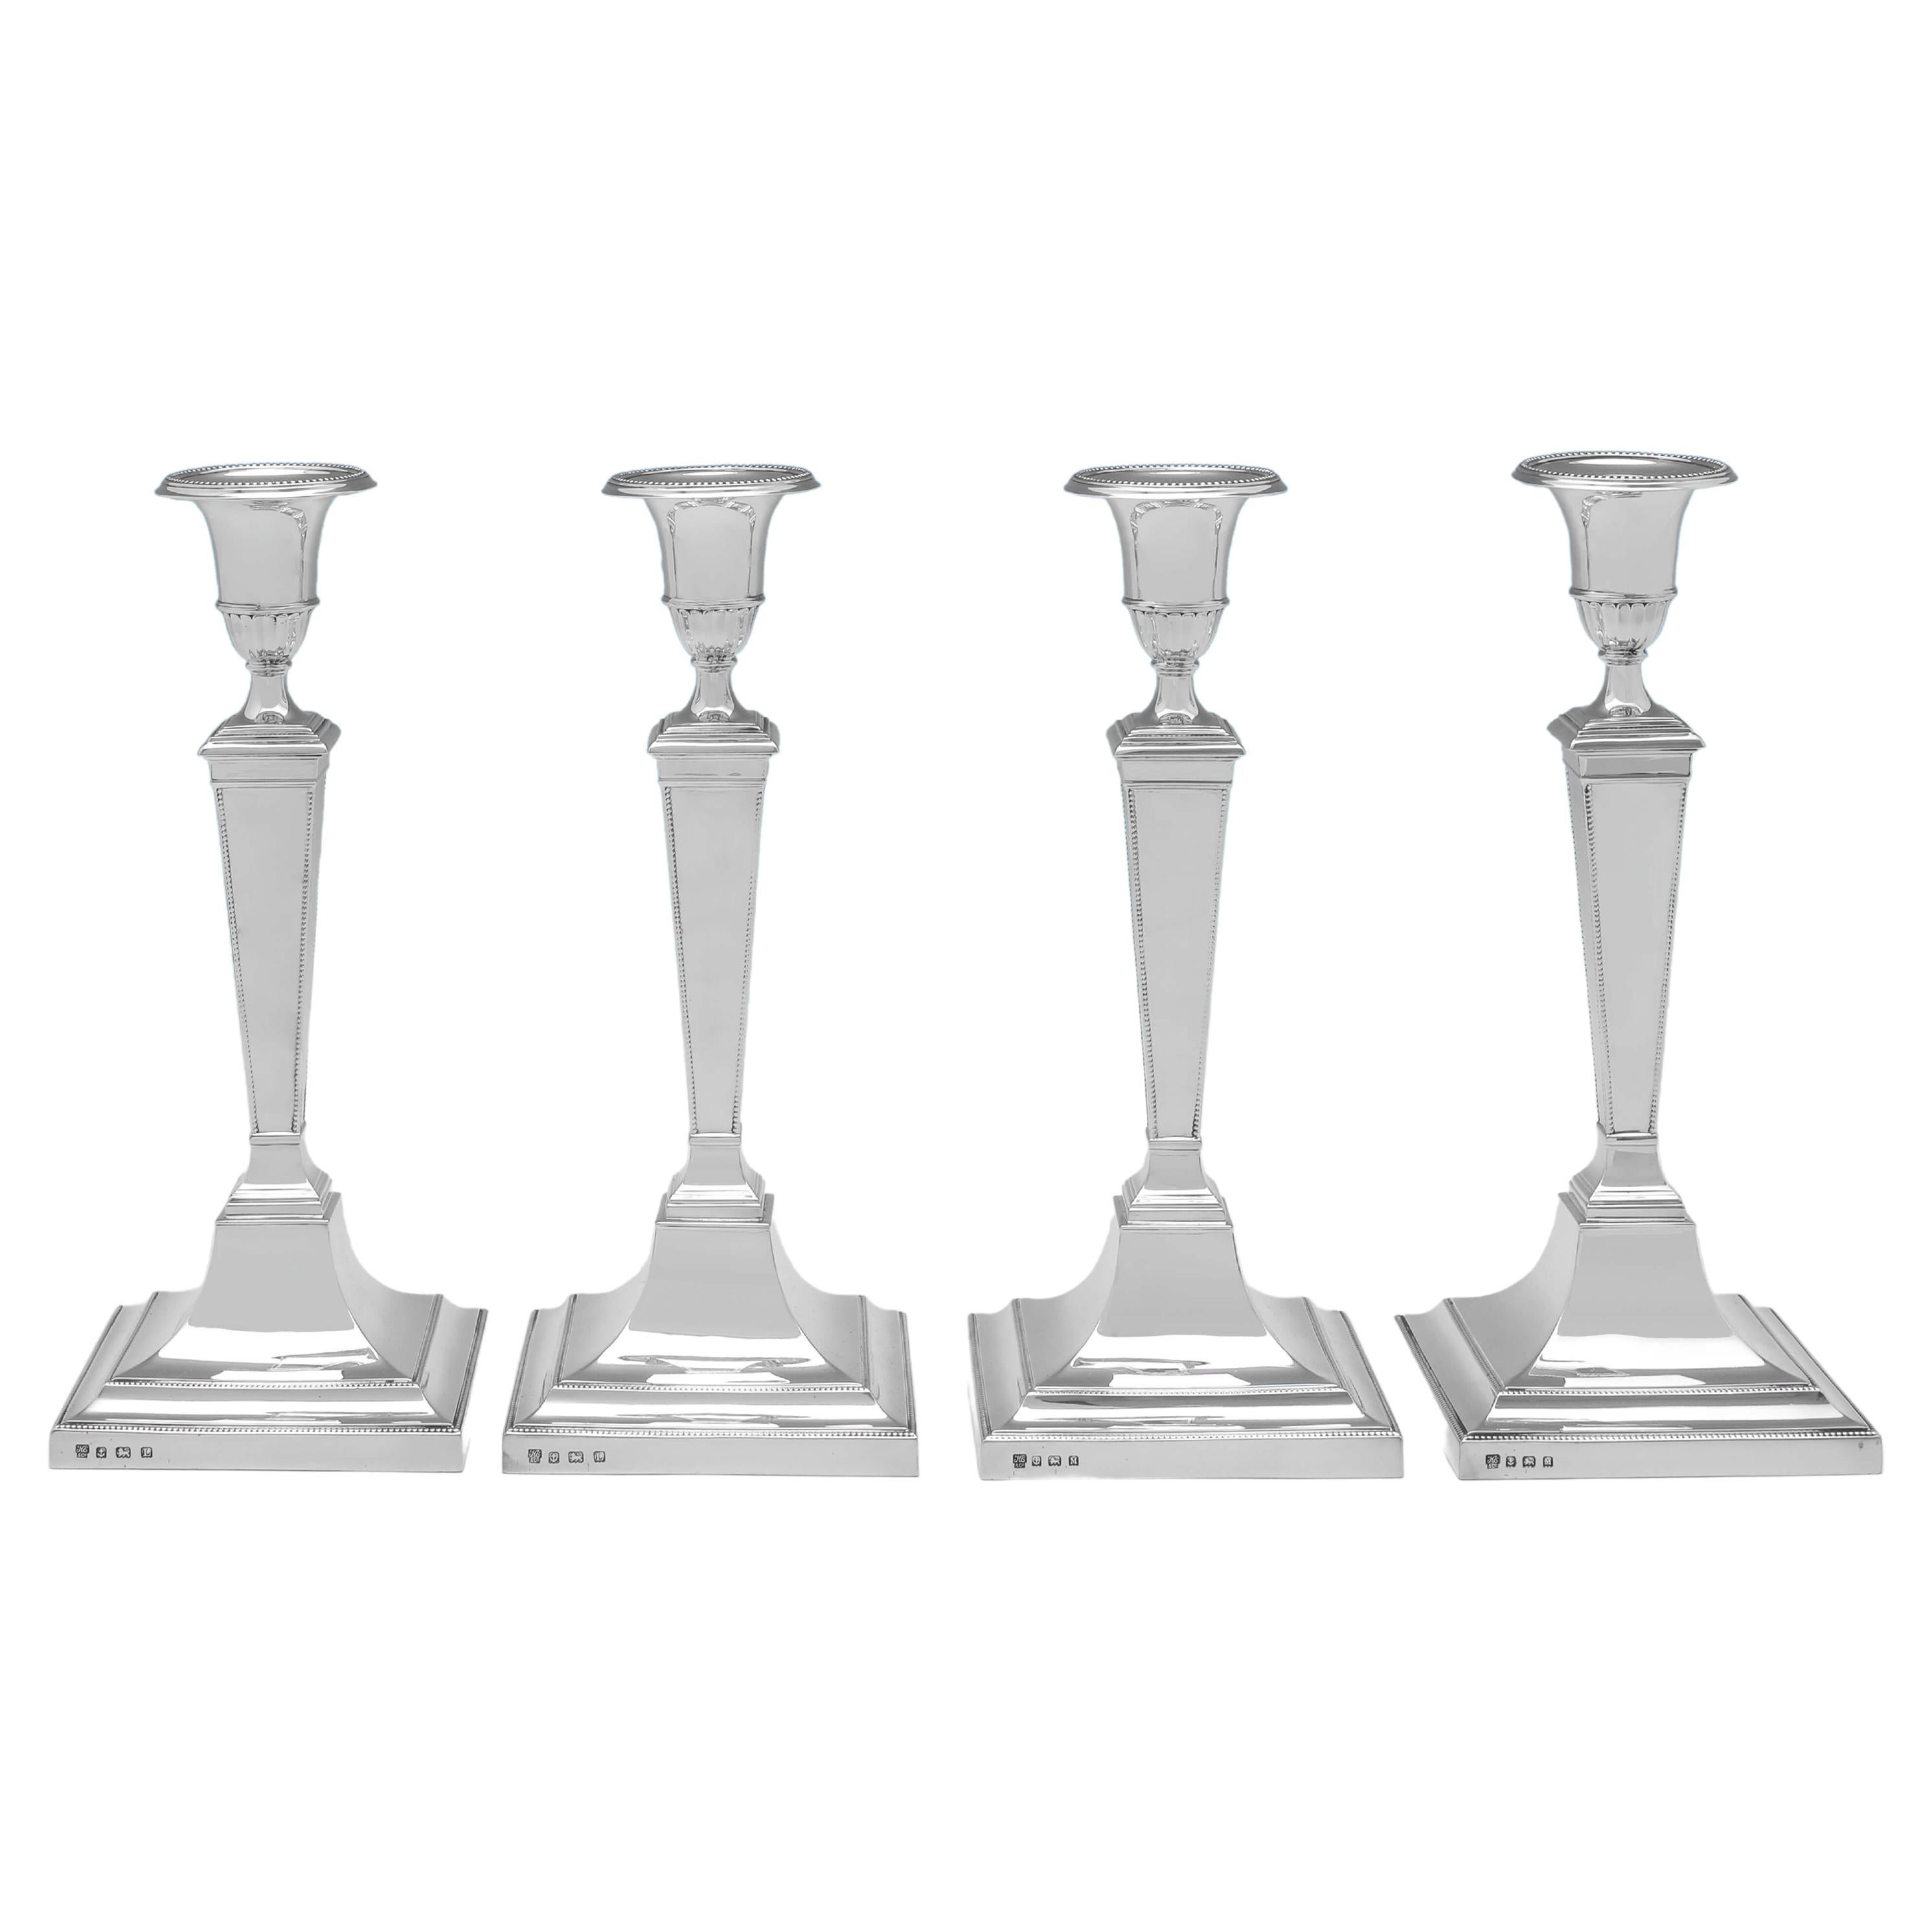 Neoclassical Revival Set of 4 Sterling Silver Candlesticks, Birmingham 1935/36